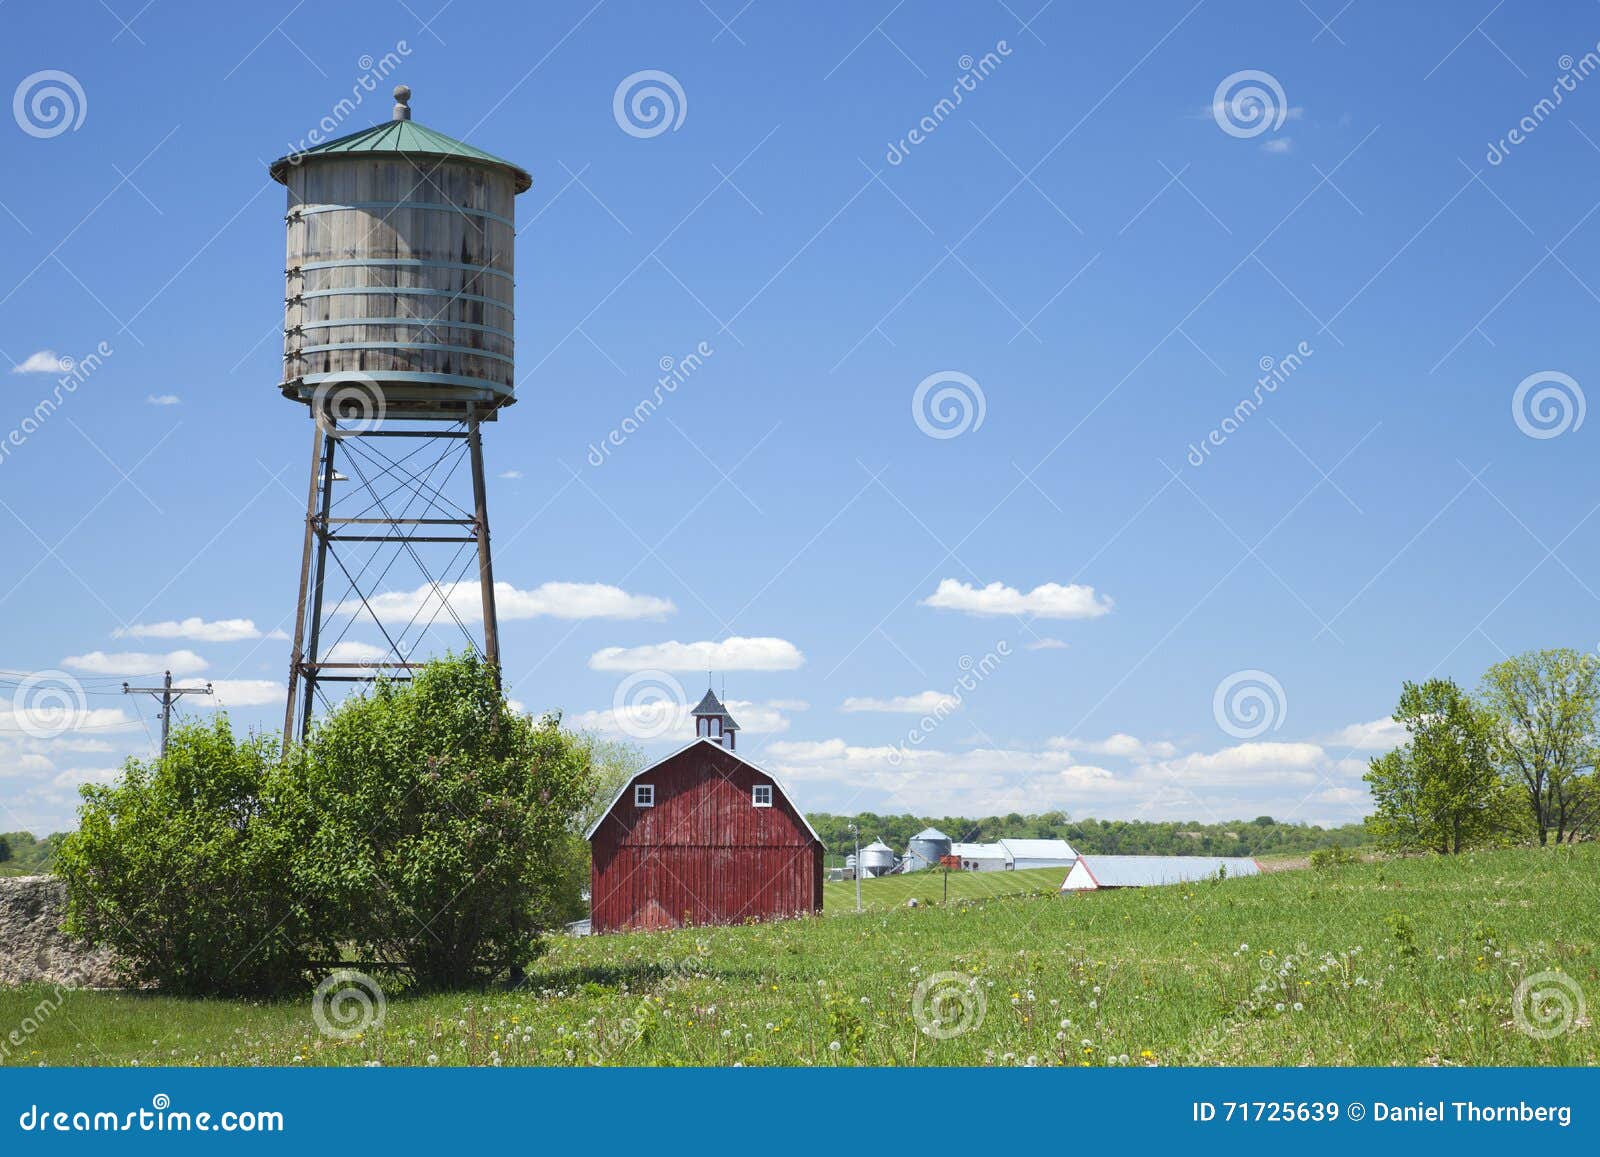 old water cistern and red barn in rural iowa